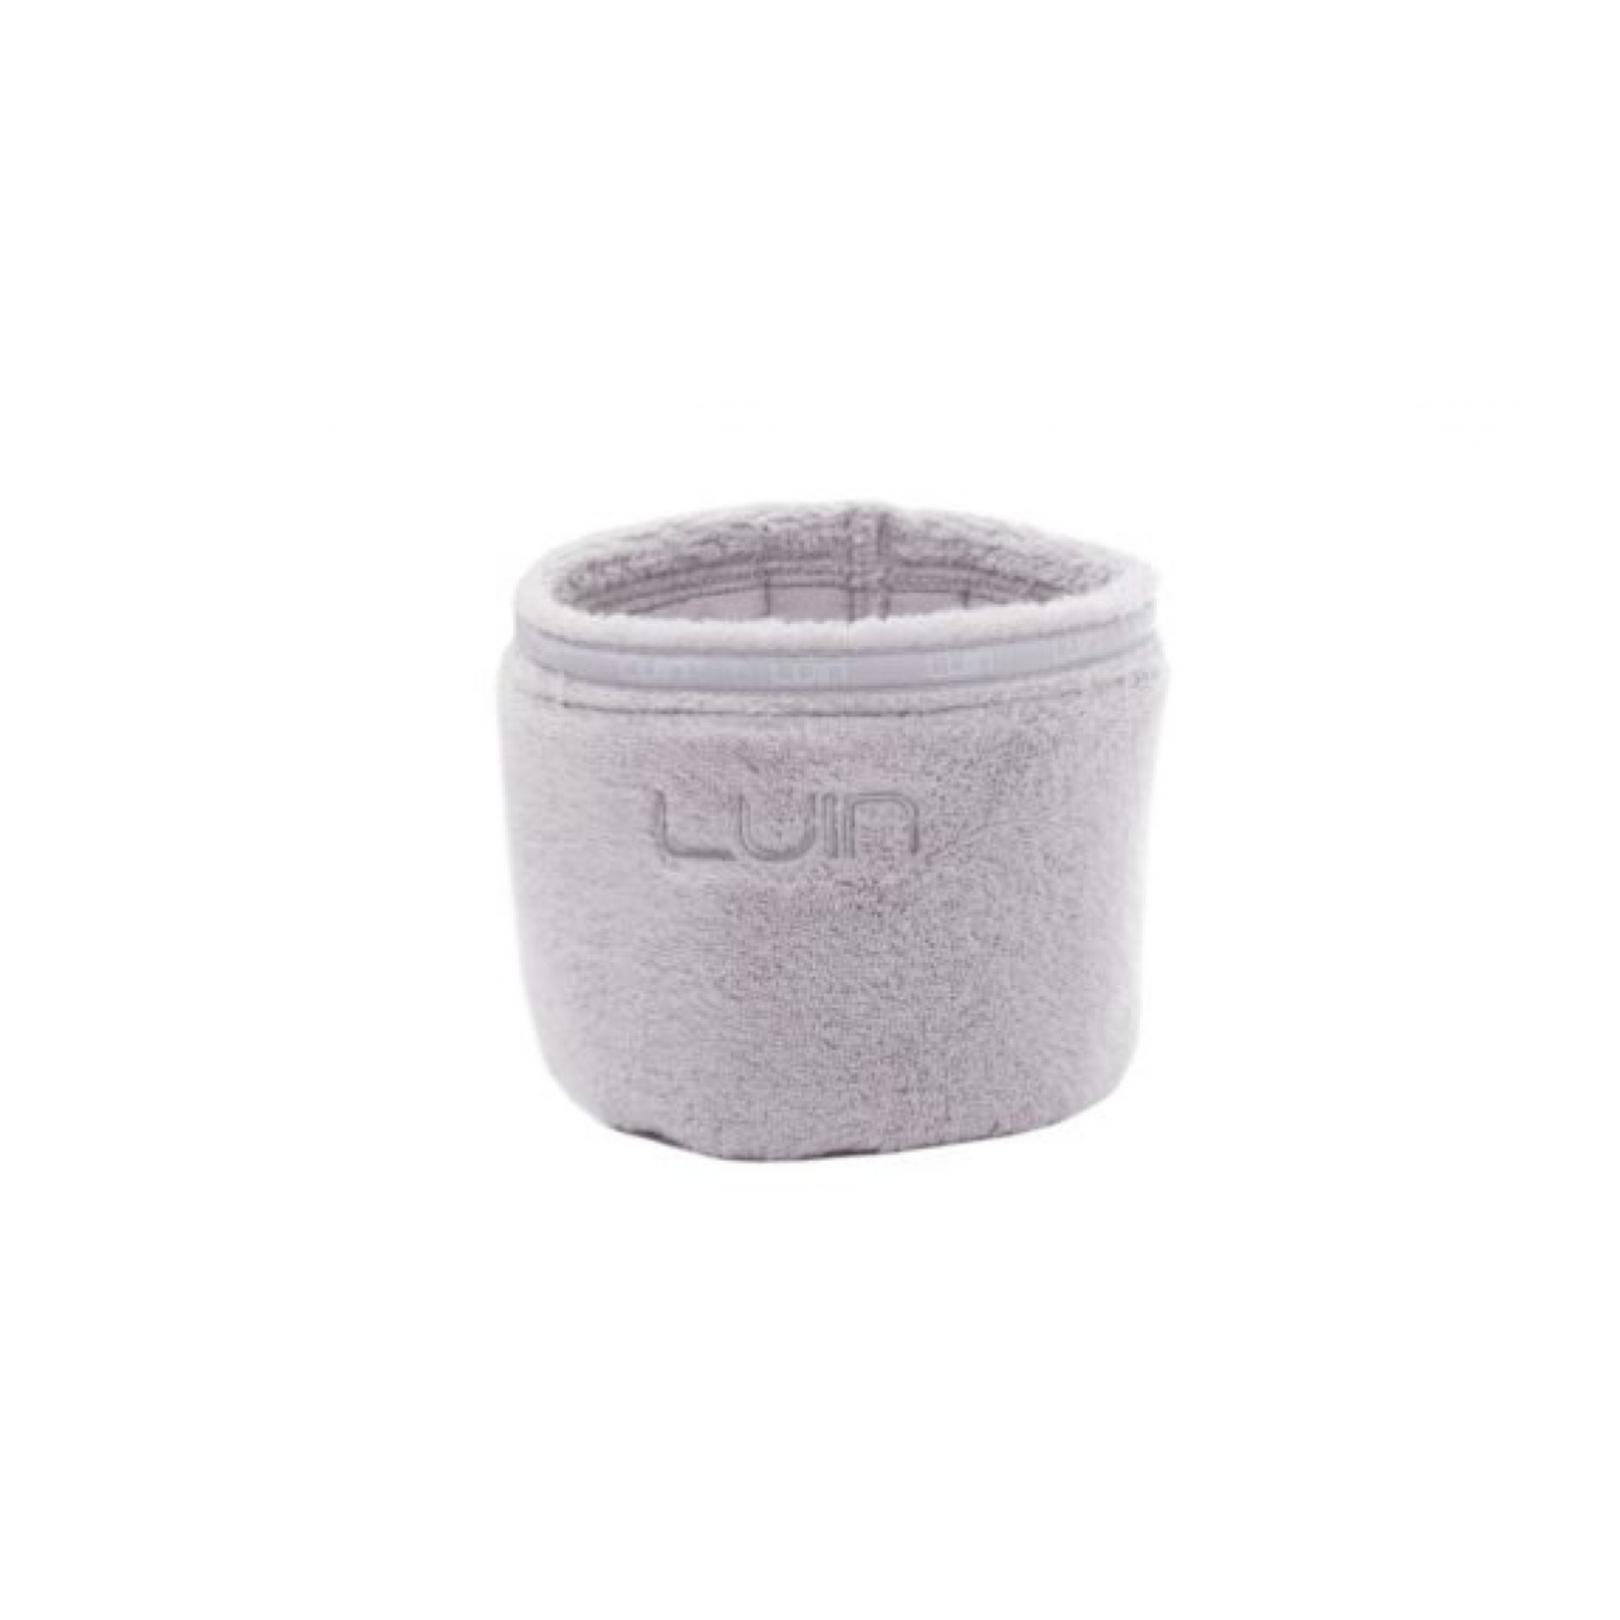 Spa basket small pearl grey Luin Living Your Home Your Spa